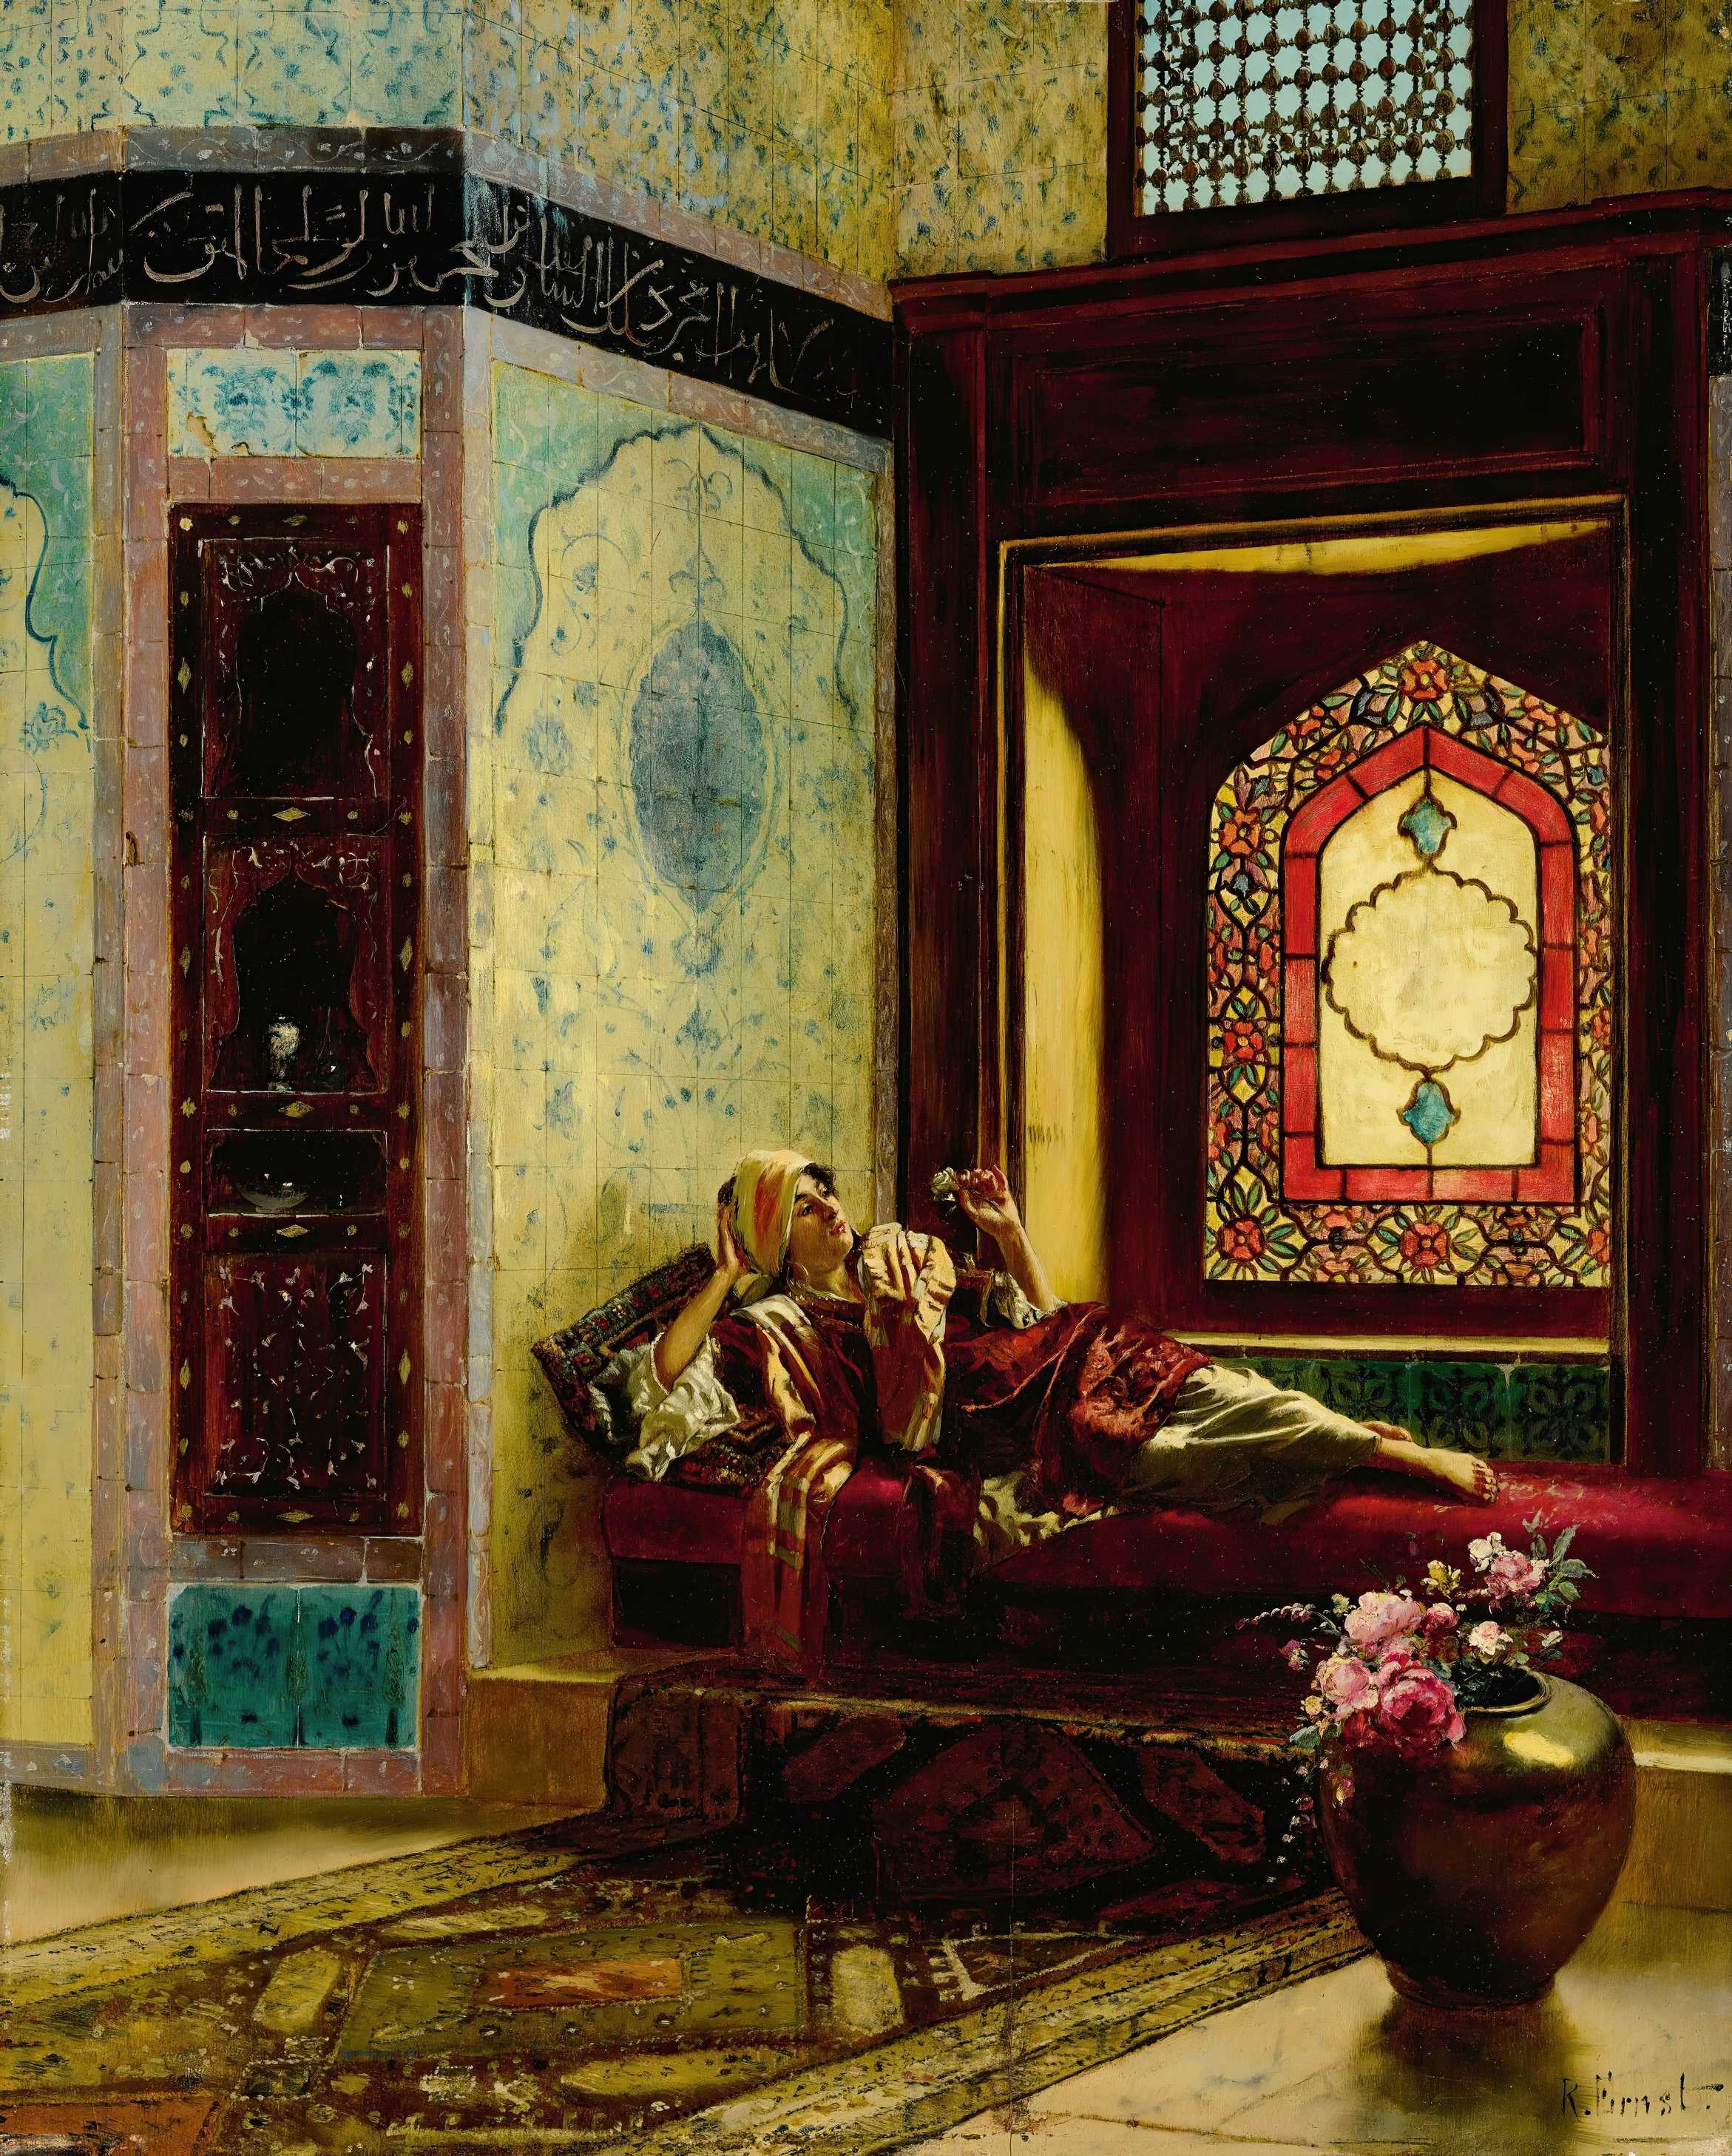 Find out more about Rudolf Ernst - Languorous oriental lady with a rose